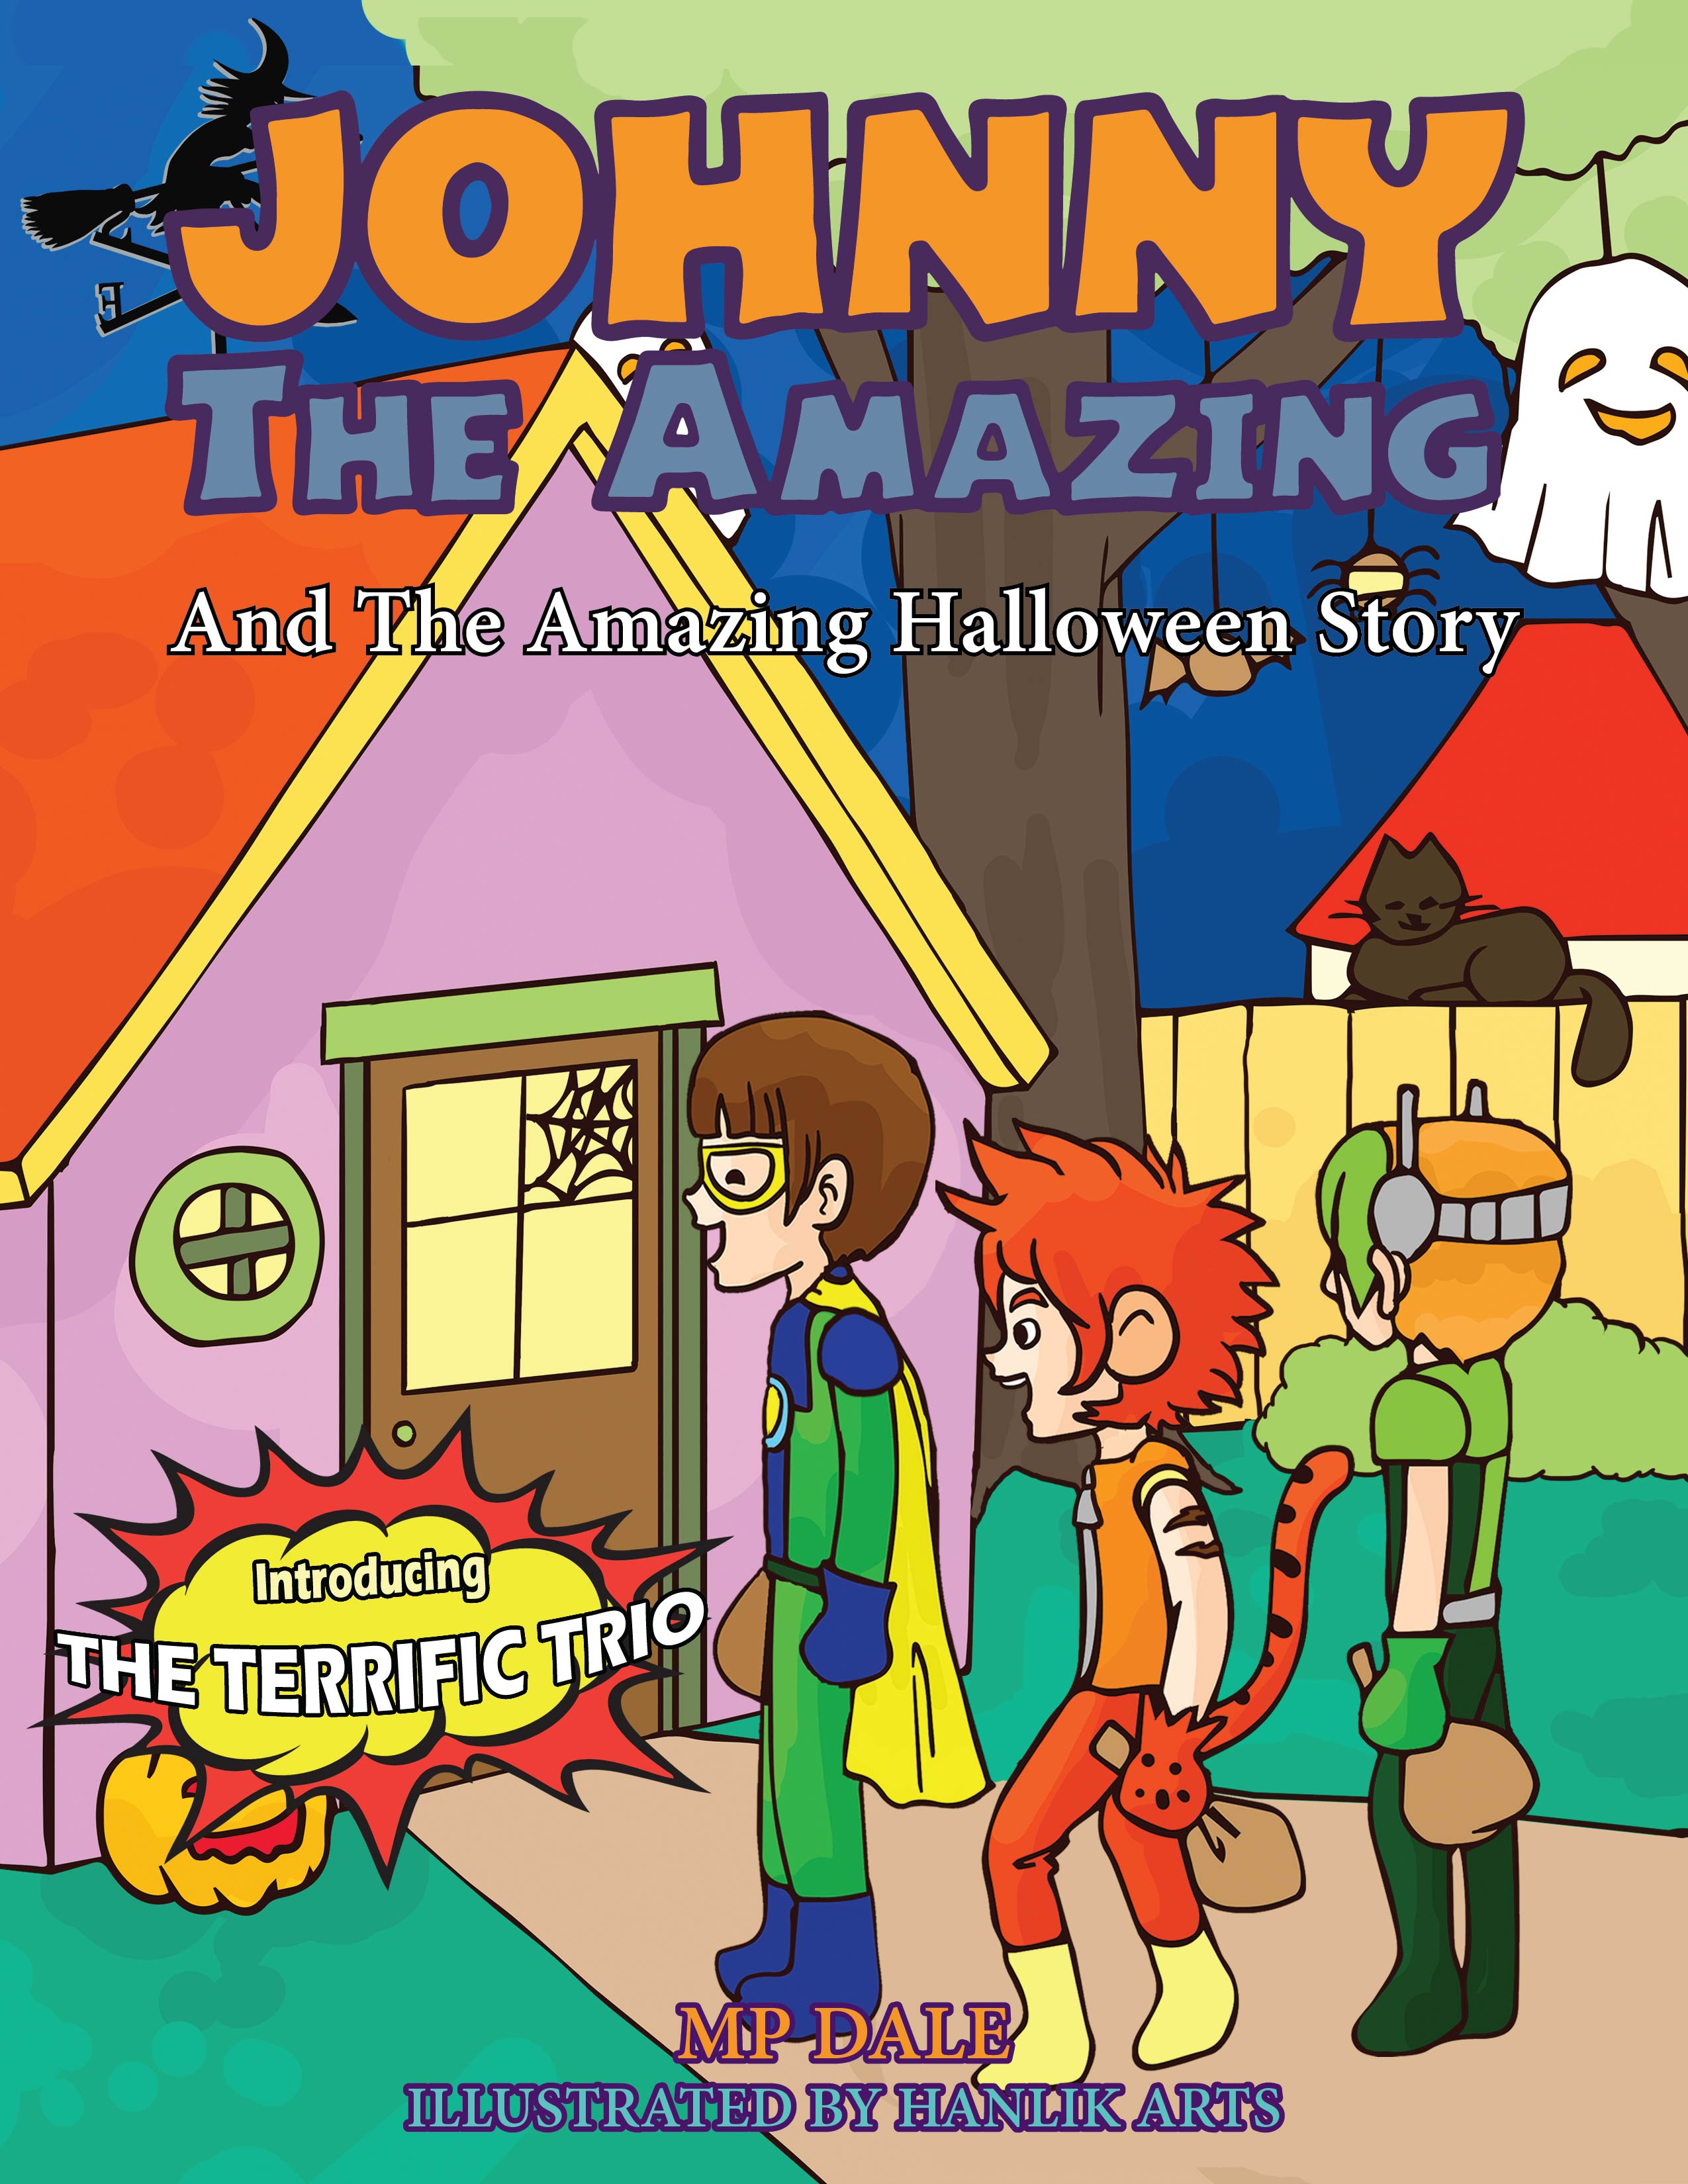 Johnny the Amazing and the Amazing Halloween Story